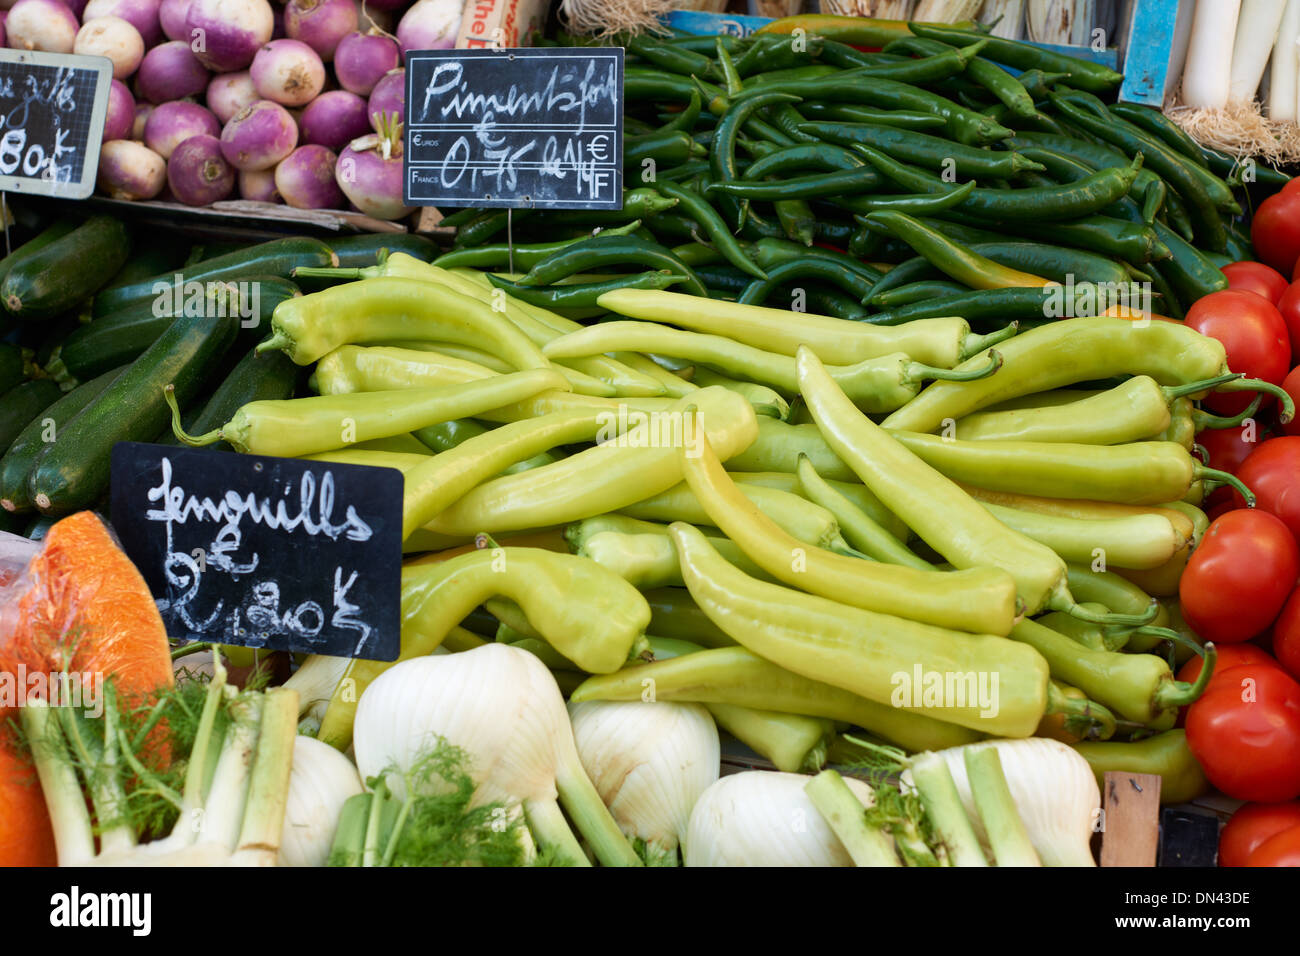 Fresh vegetables for sale on market stall in Aix en Provence, France Stock Photo